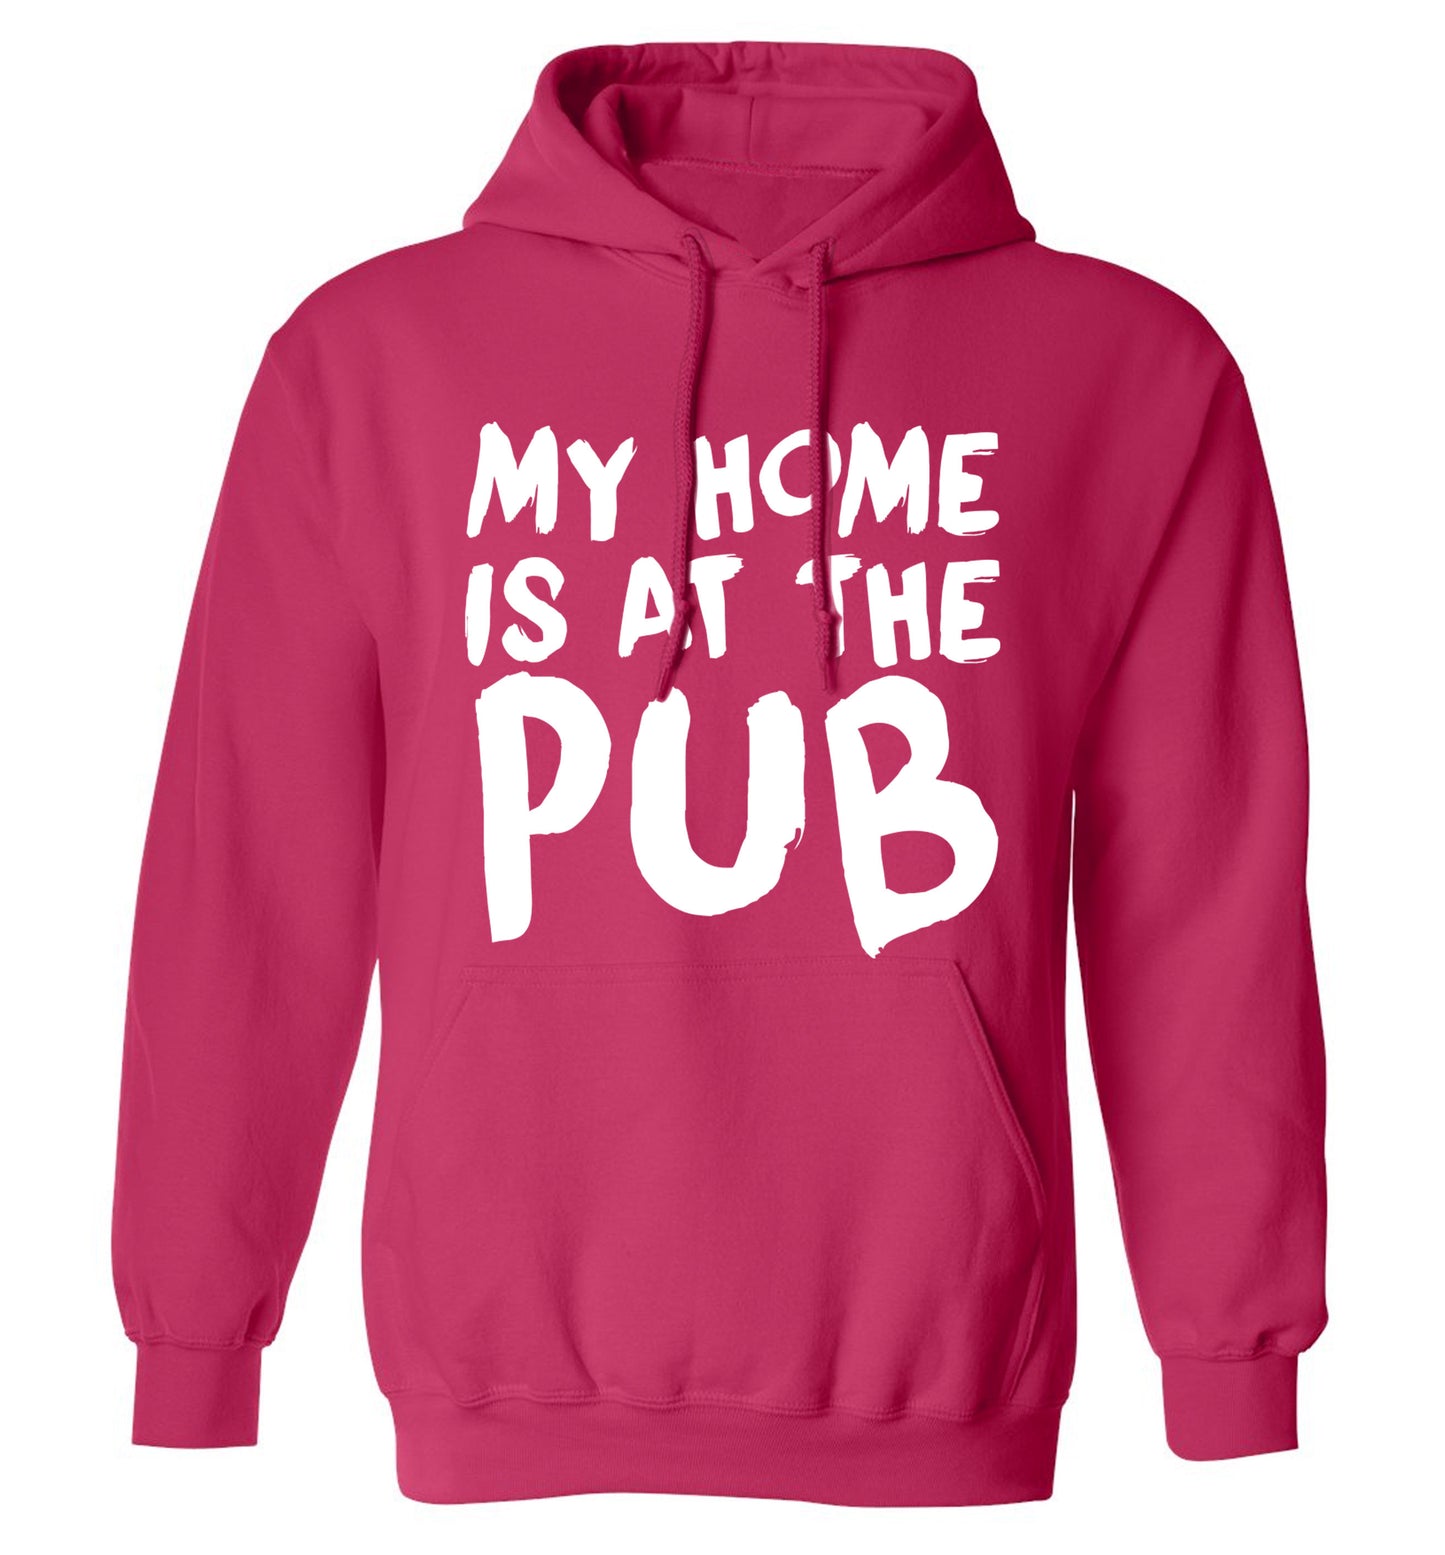 My home is at the pub adults unisex pink hoodie 2XL